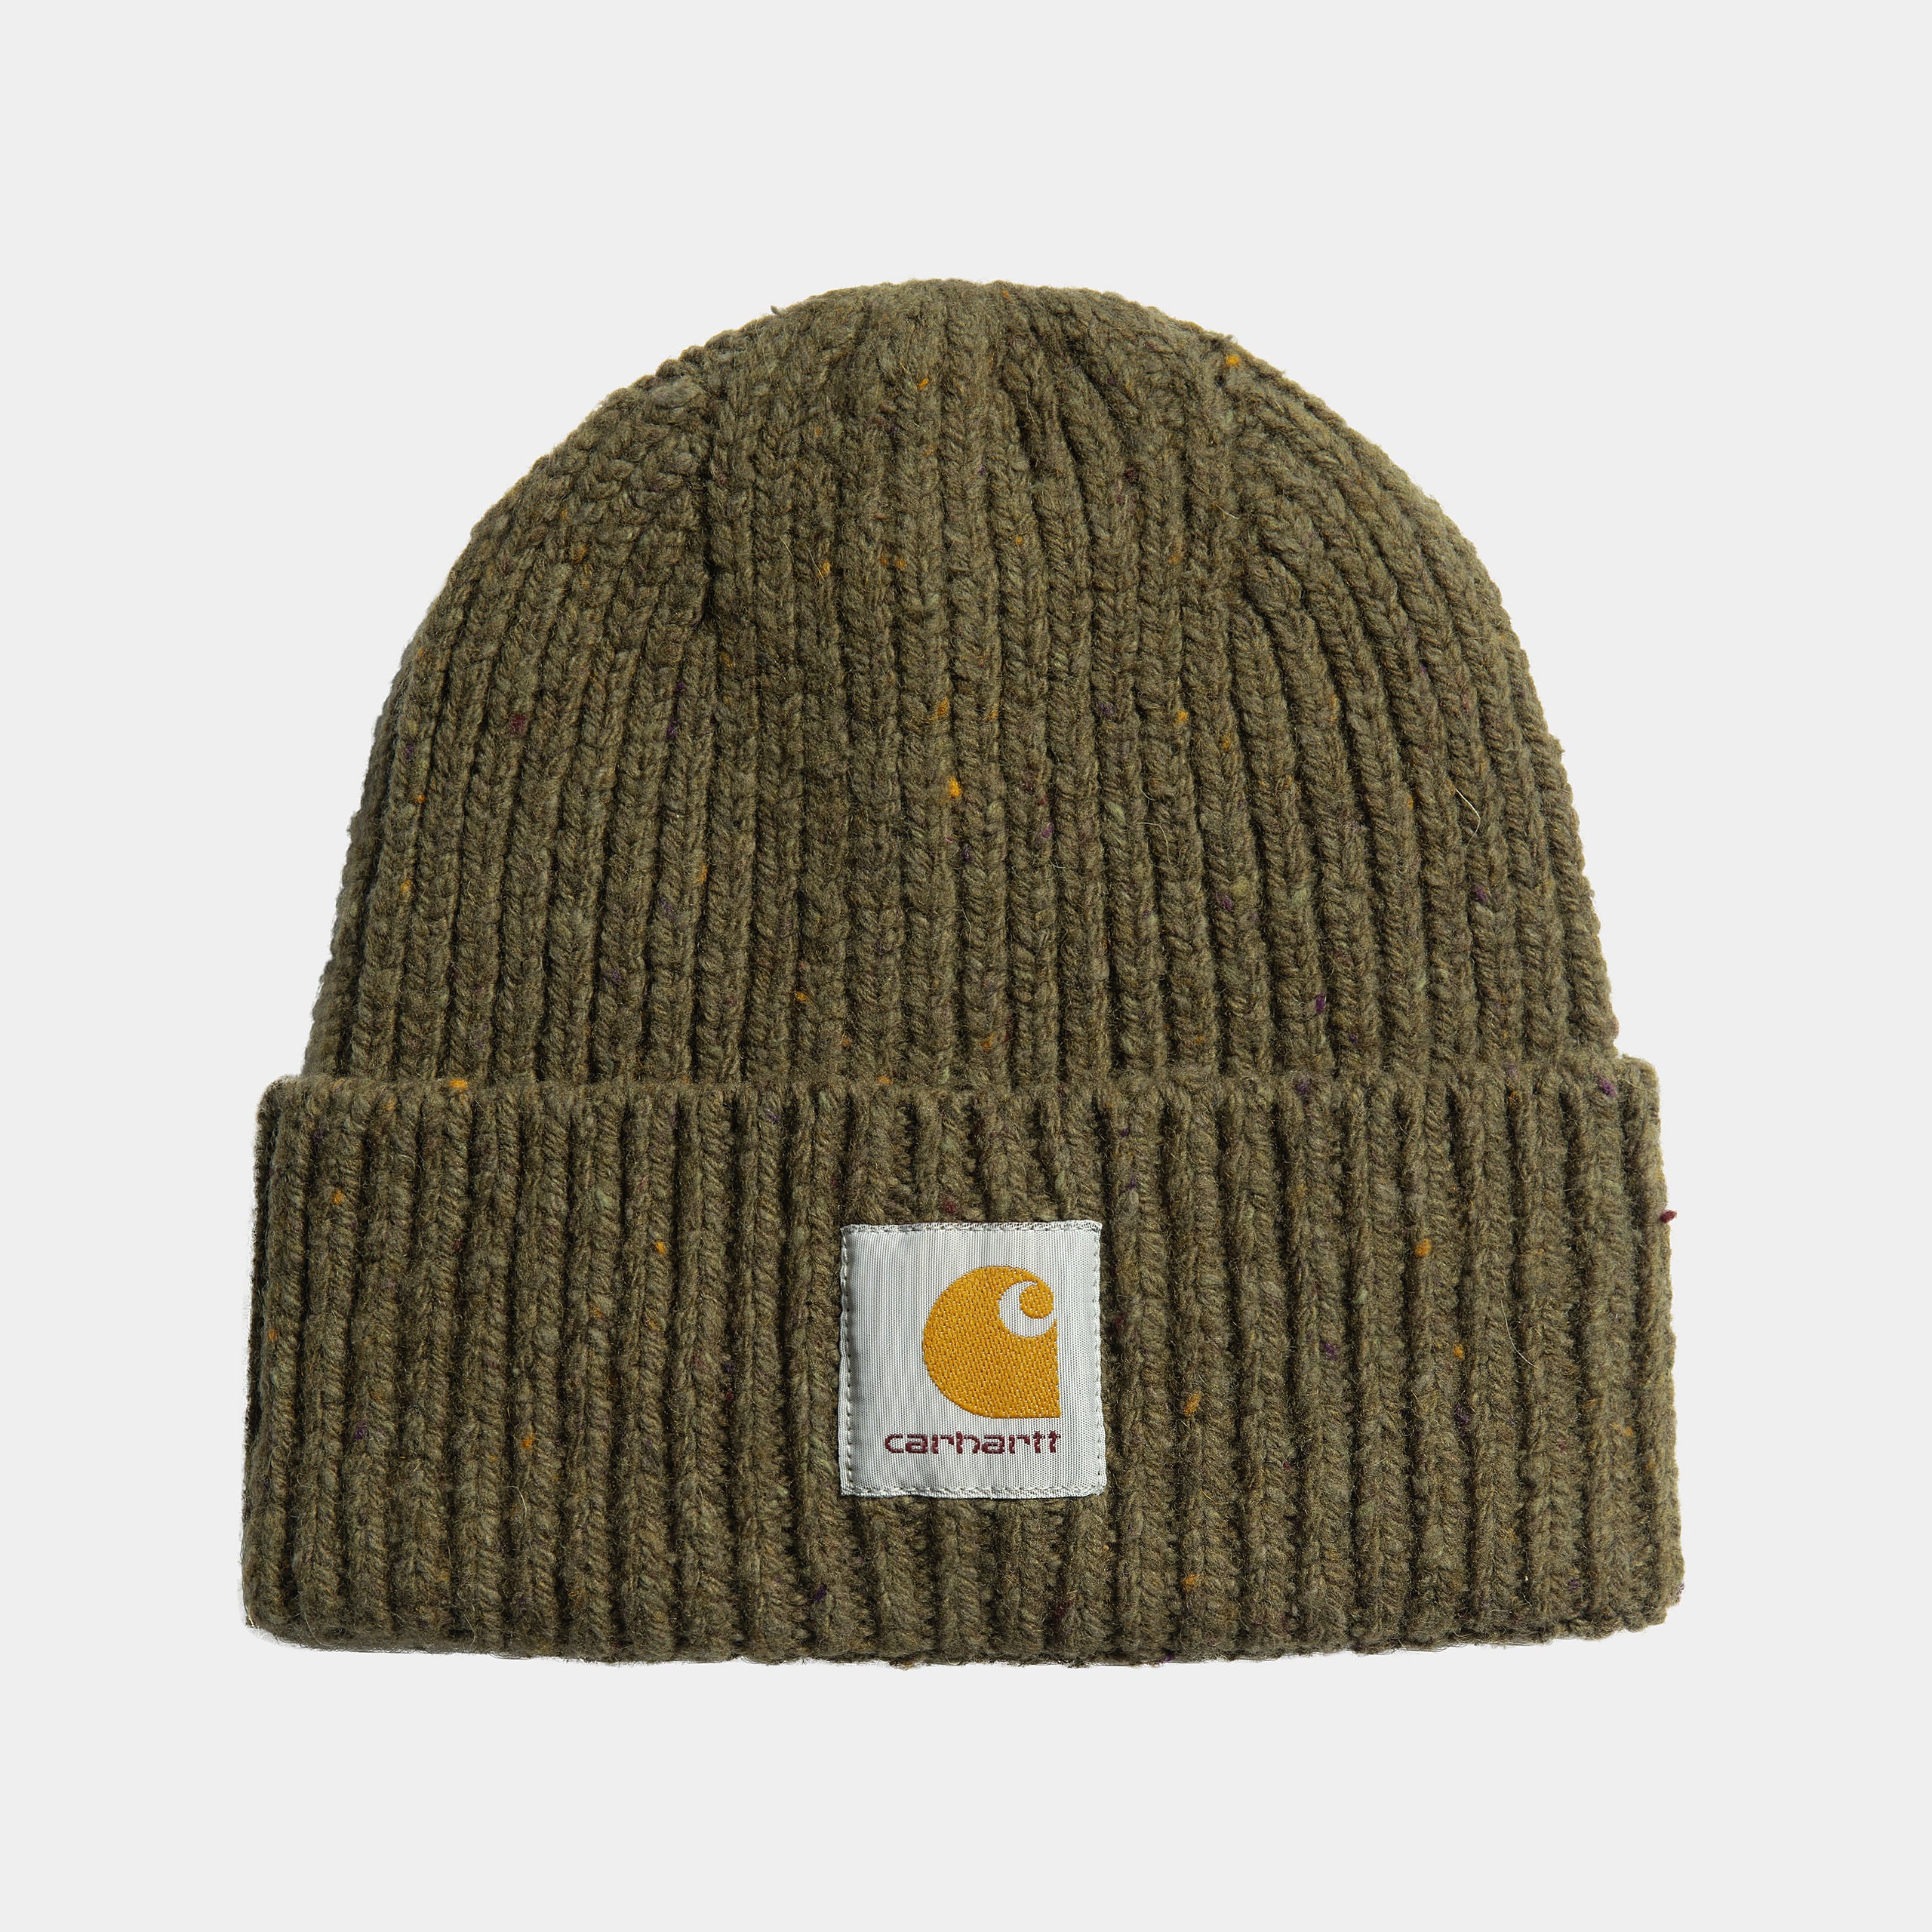 Carhartt WIP Unisex Anglistic Speckled Beanie - Highland